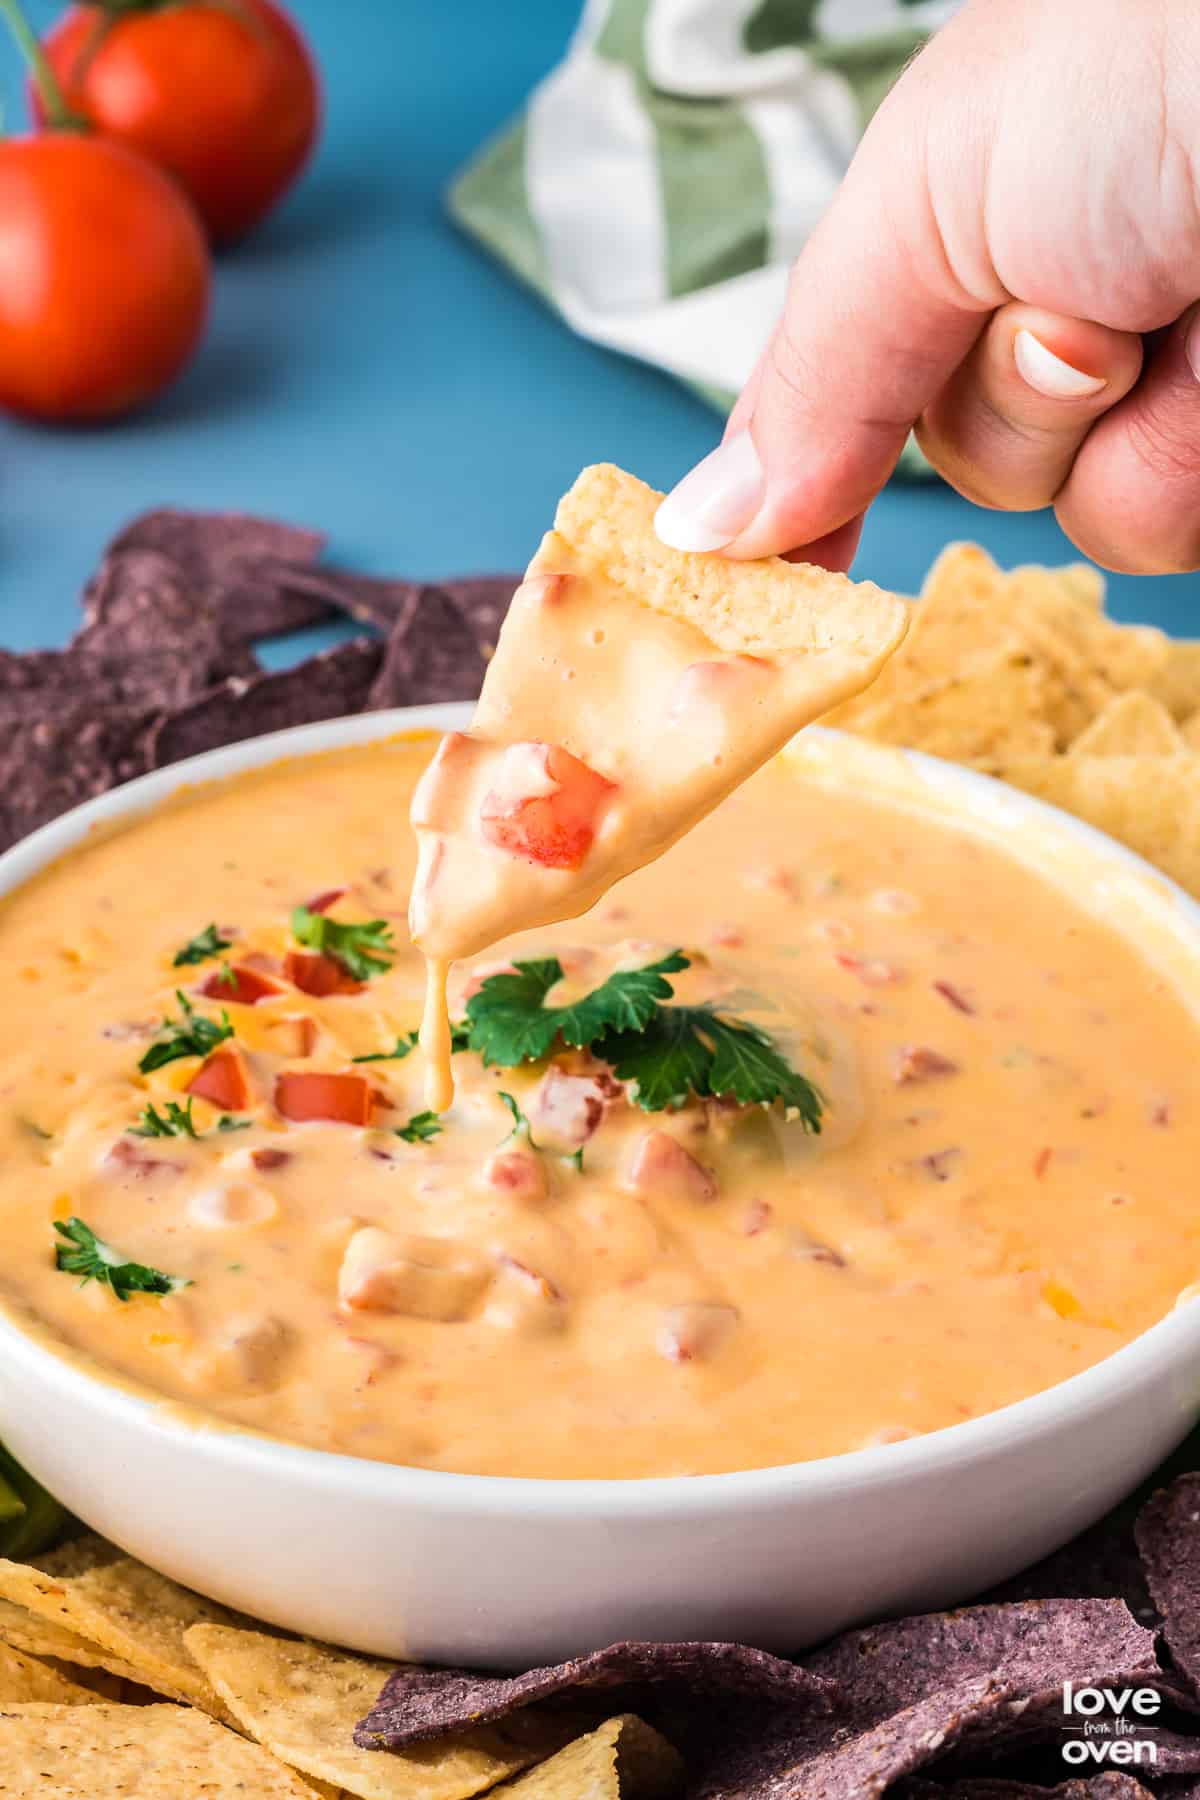 A chip being dipped into a bowl of Rotel cheese dip.